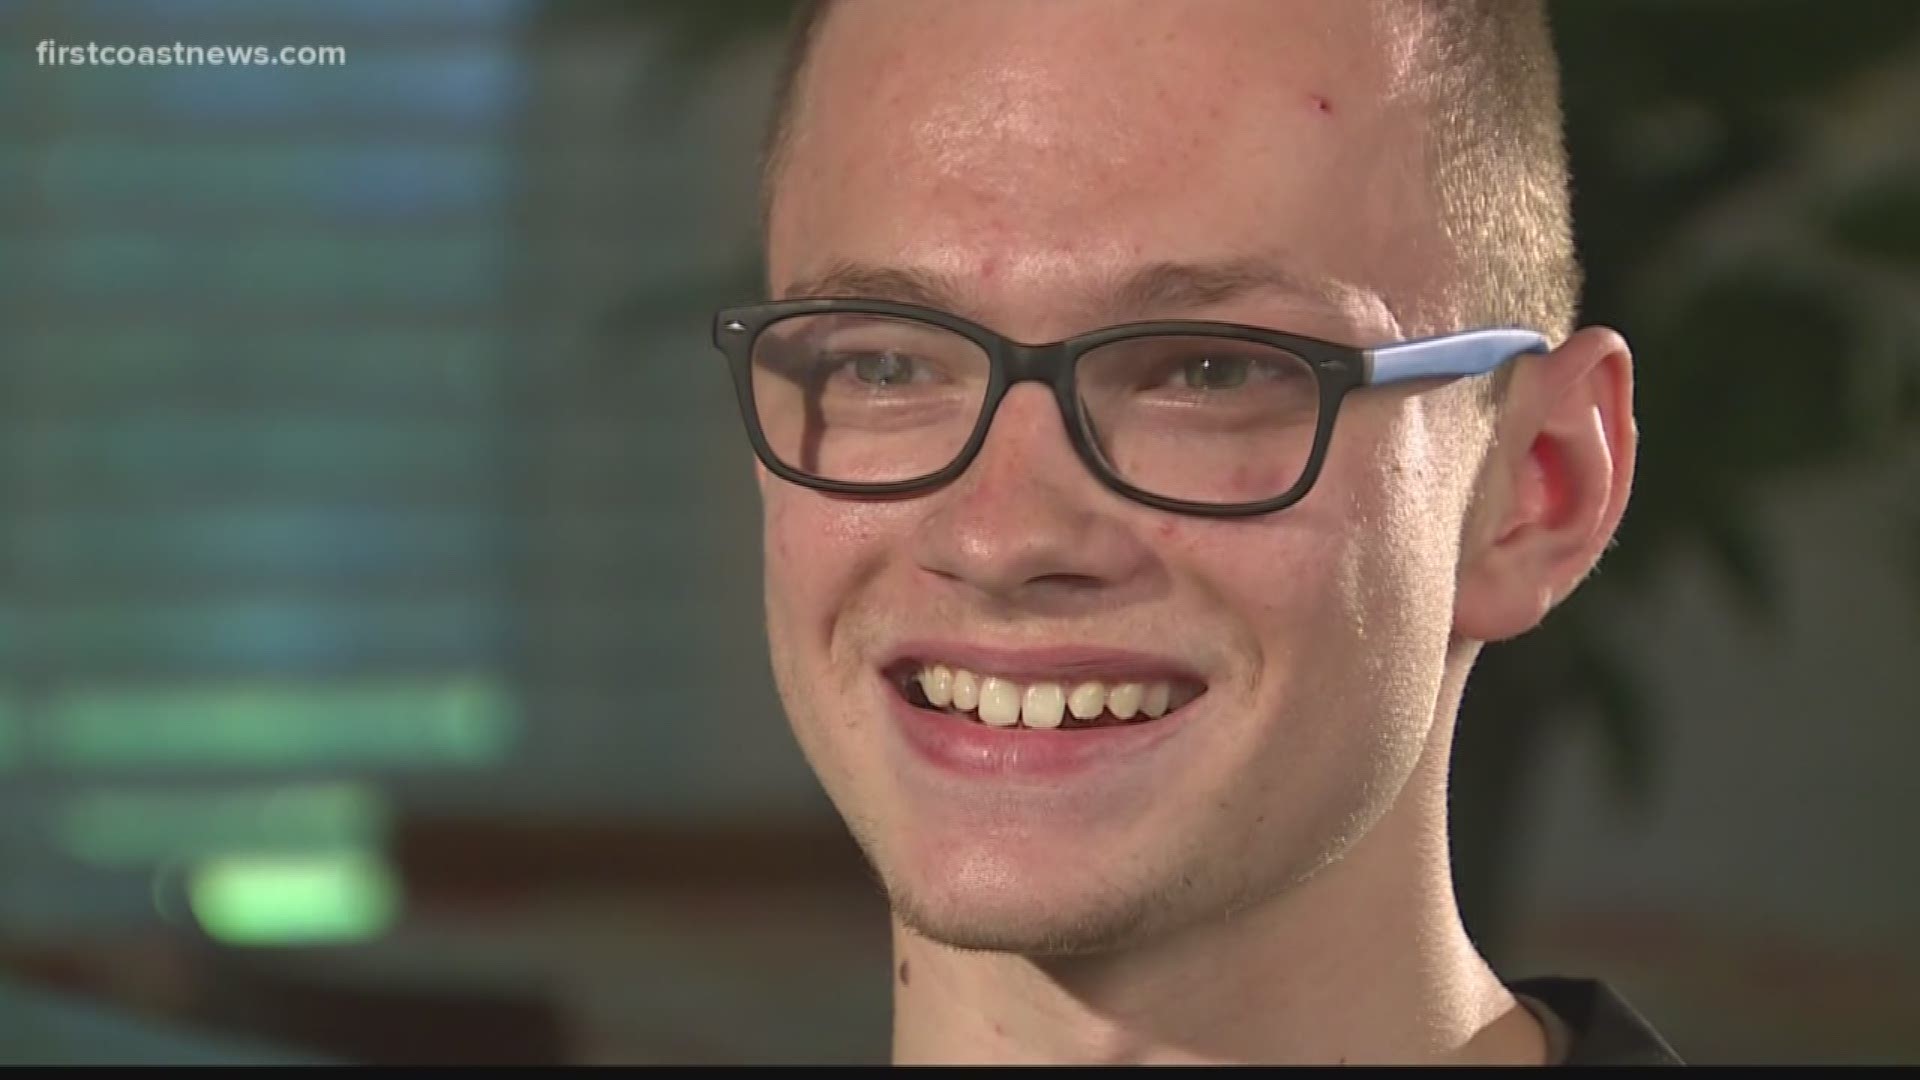 It's a memory the 19-year-old who has cerebral palsy will never forget.